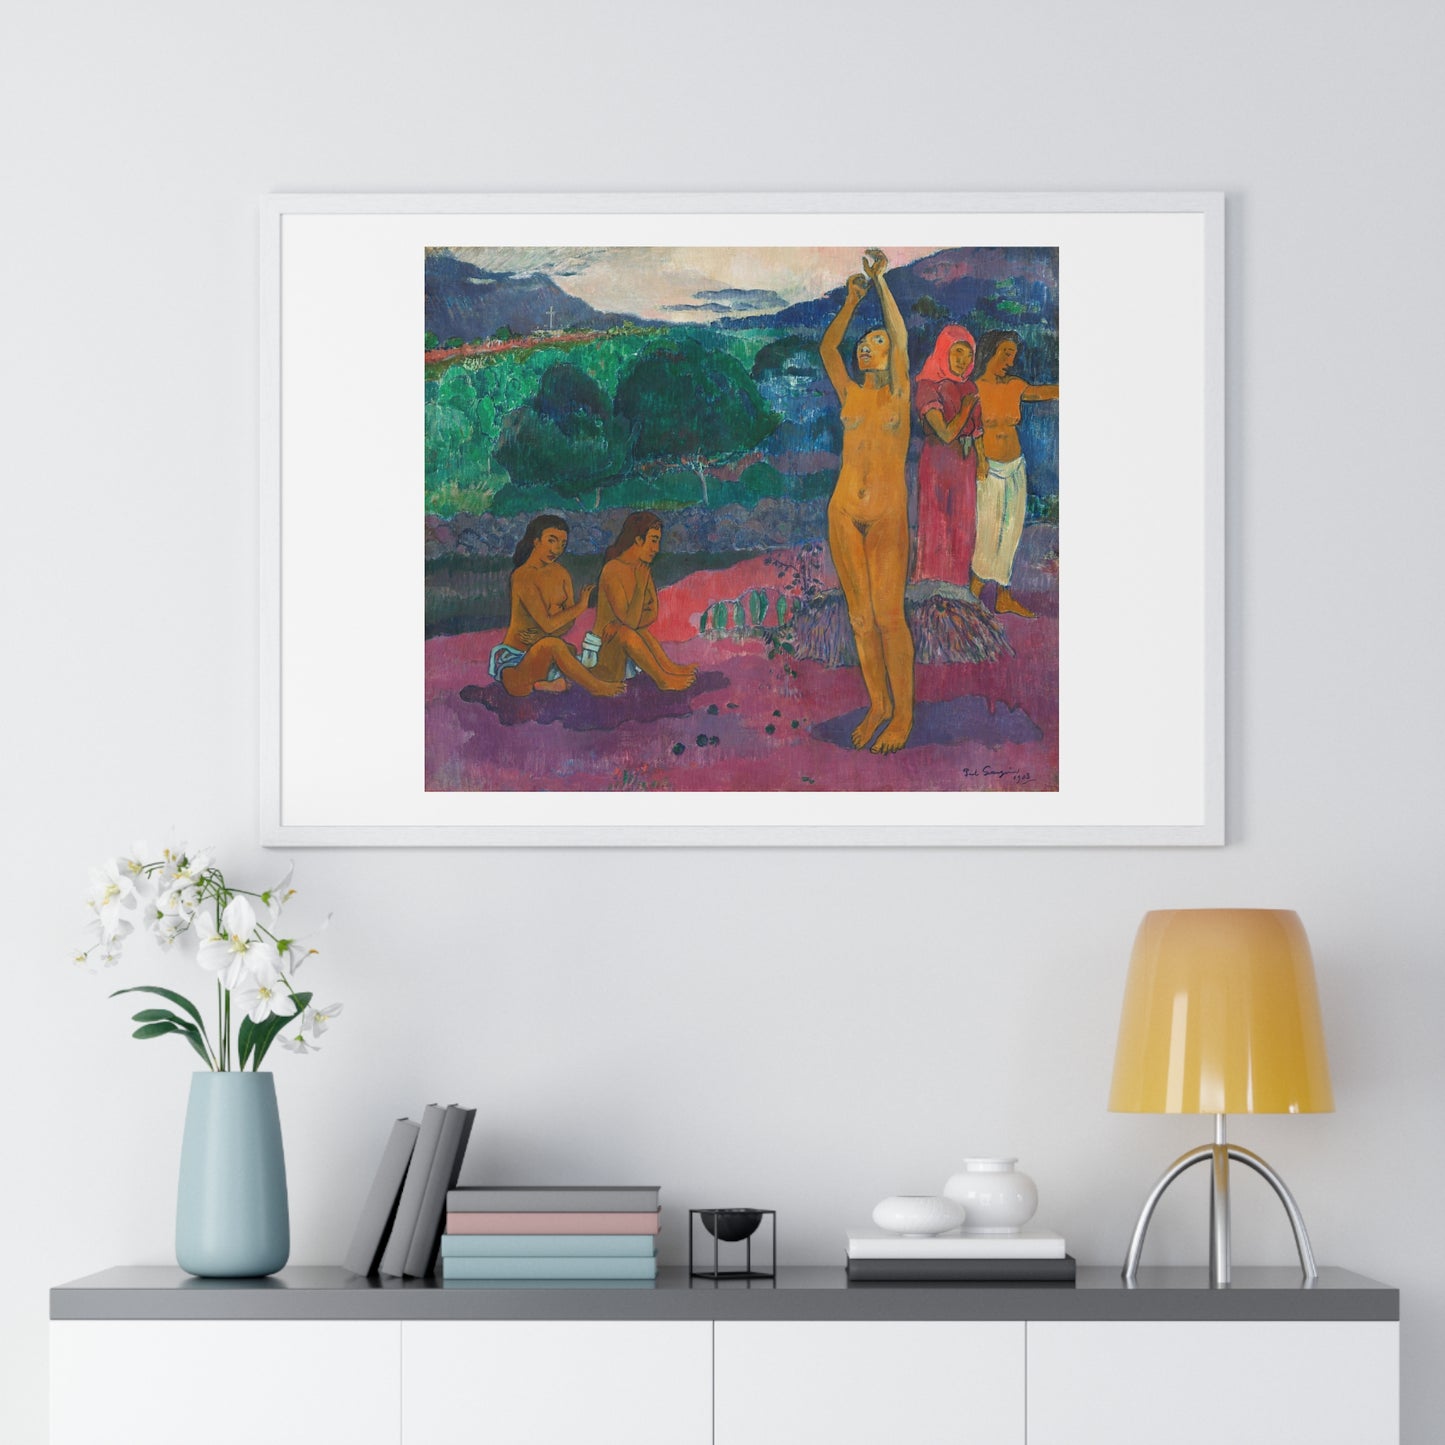 The Invocation (1903) by Paul Gauguin, from the Original, Framed Print